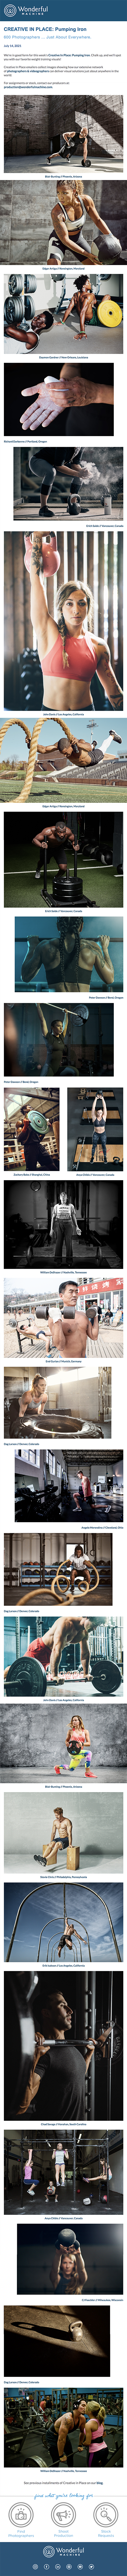 Wonderful Machine's July Creative In Place emailer campaign: Pumping Iron